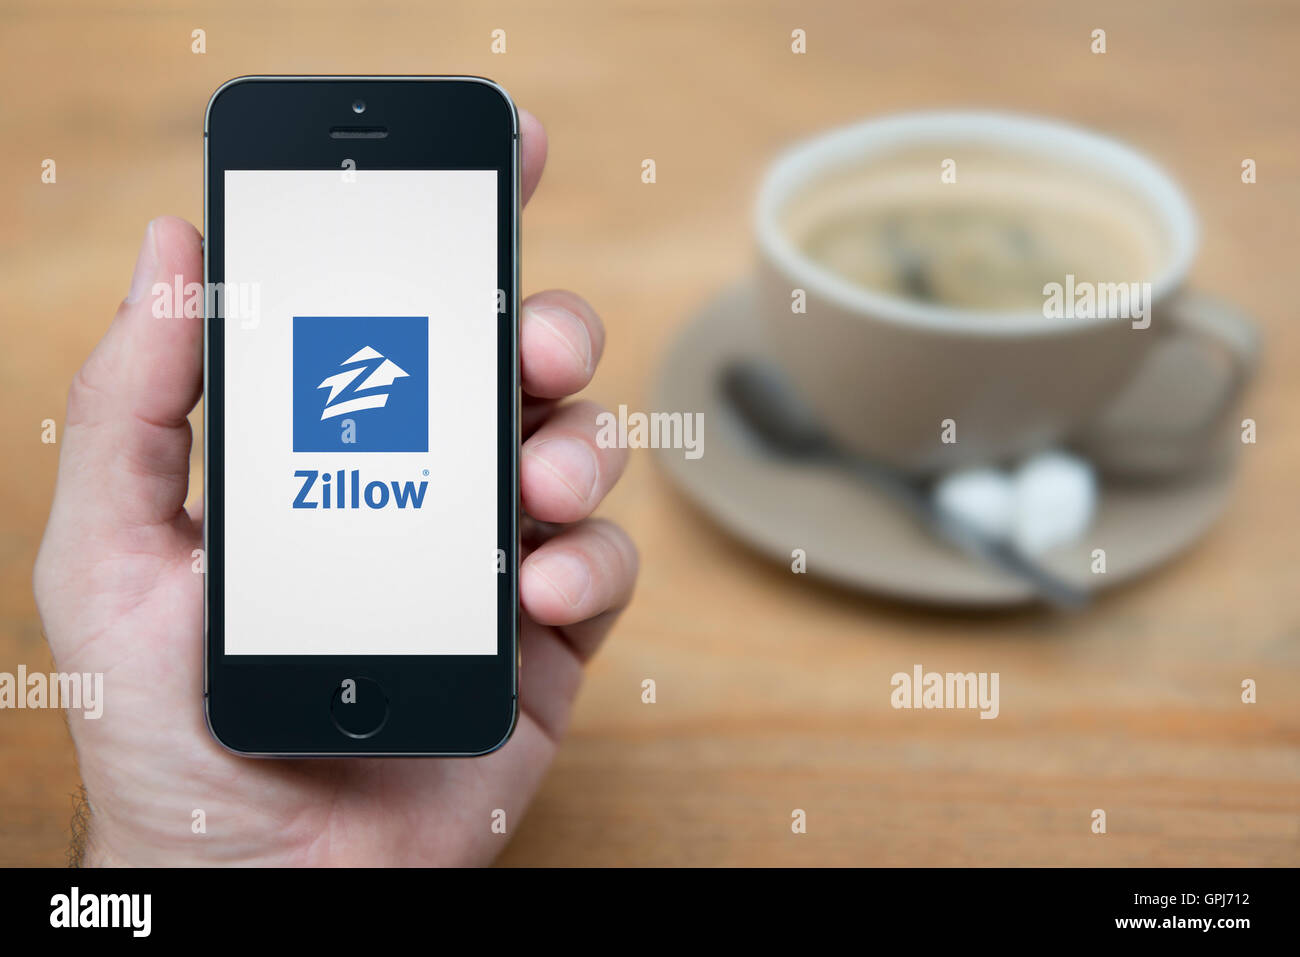 A man looks at his iPhone which displays the Zillow logo, while sat with a cup of coffee (Editorial use only). Stock Photo